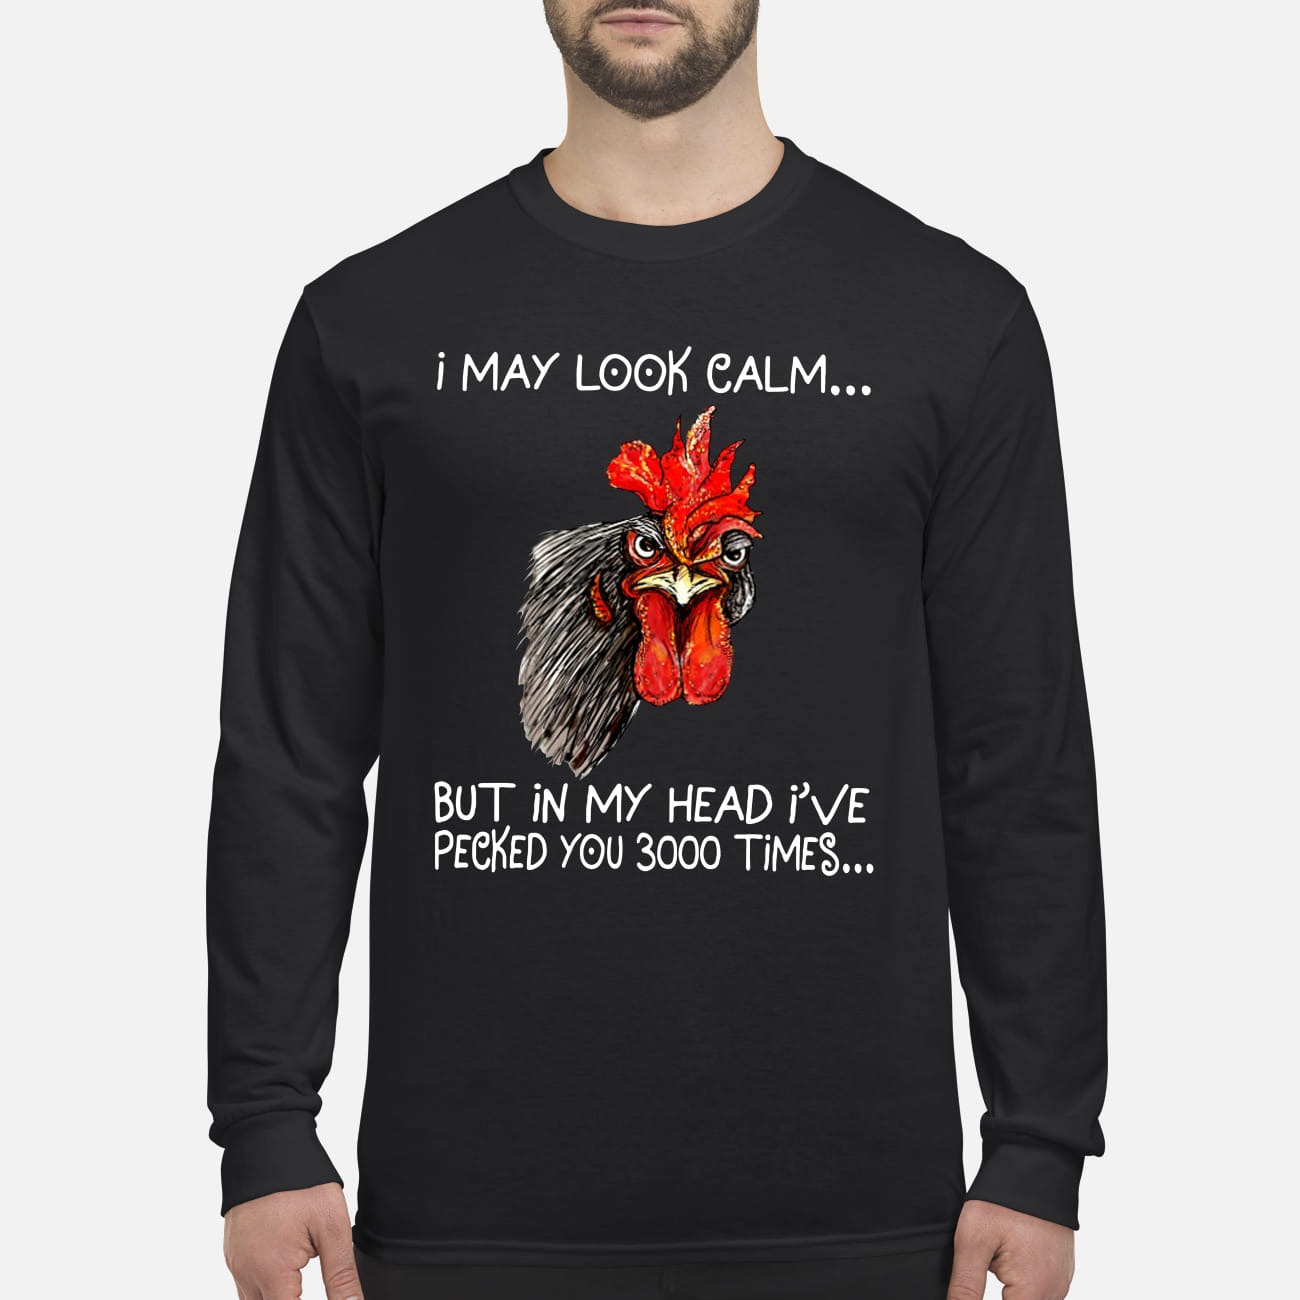 Chicken I may look calm but in my head I've pecked you 3000 times men's long sleeved shirt